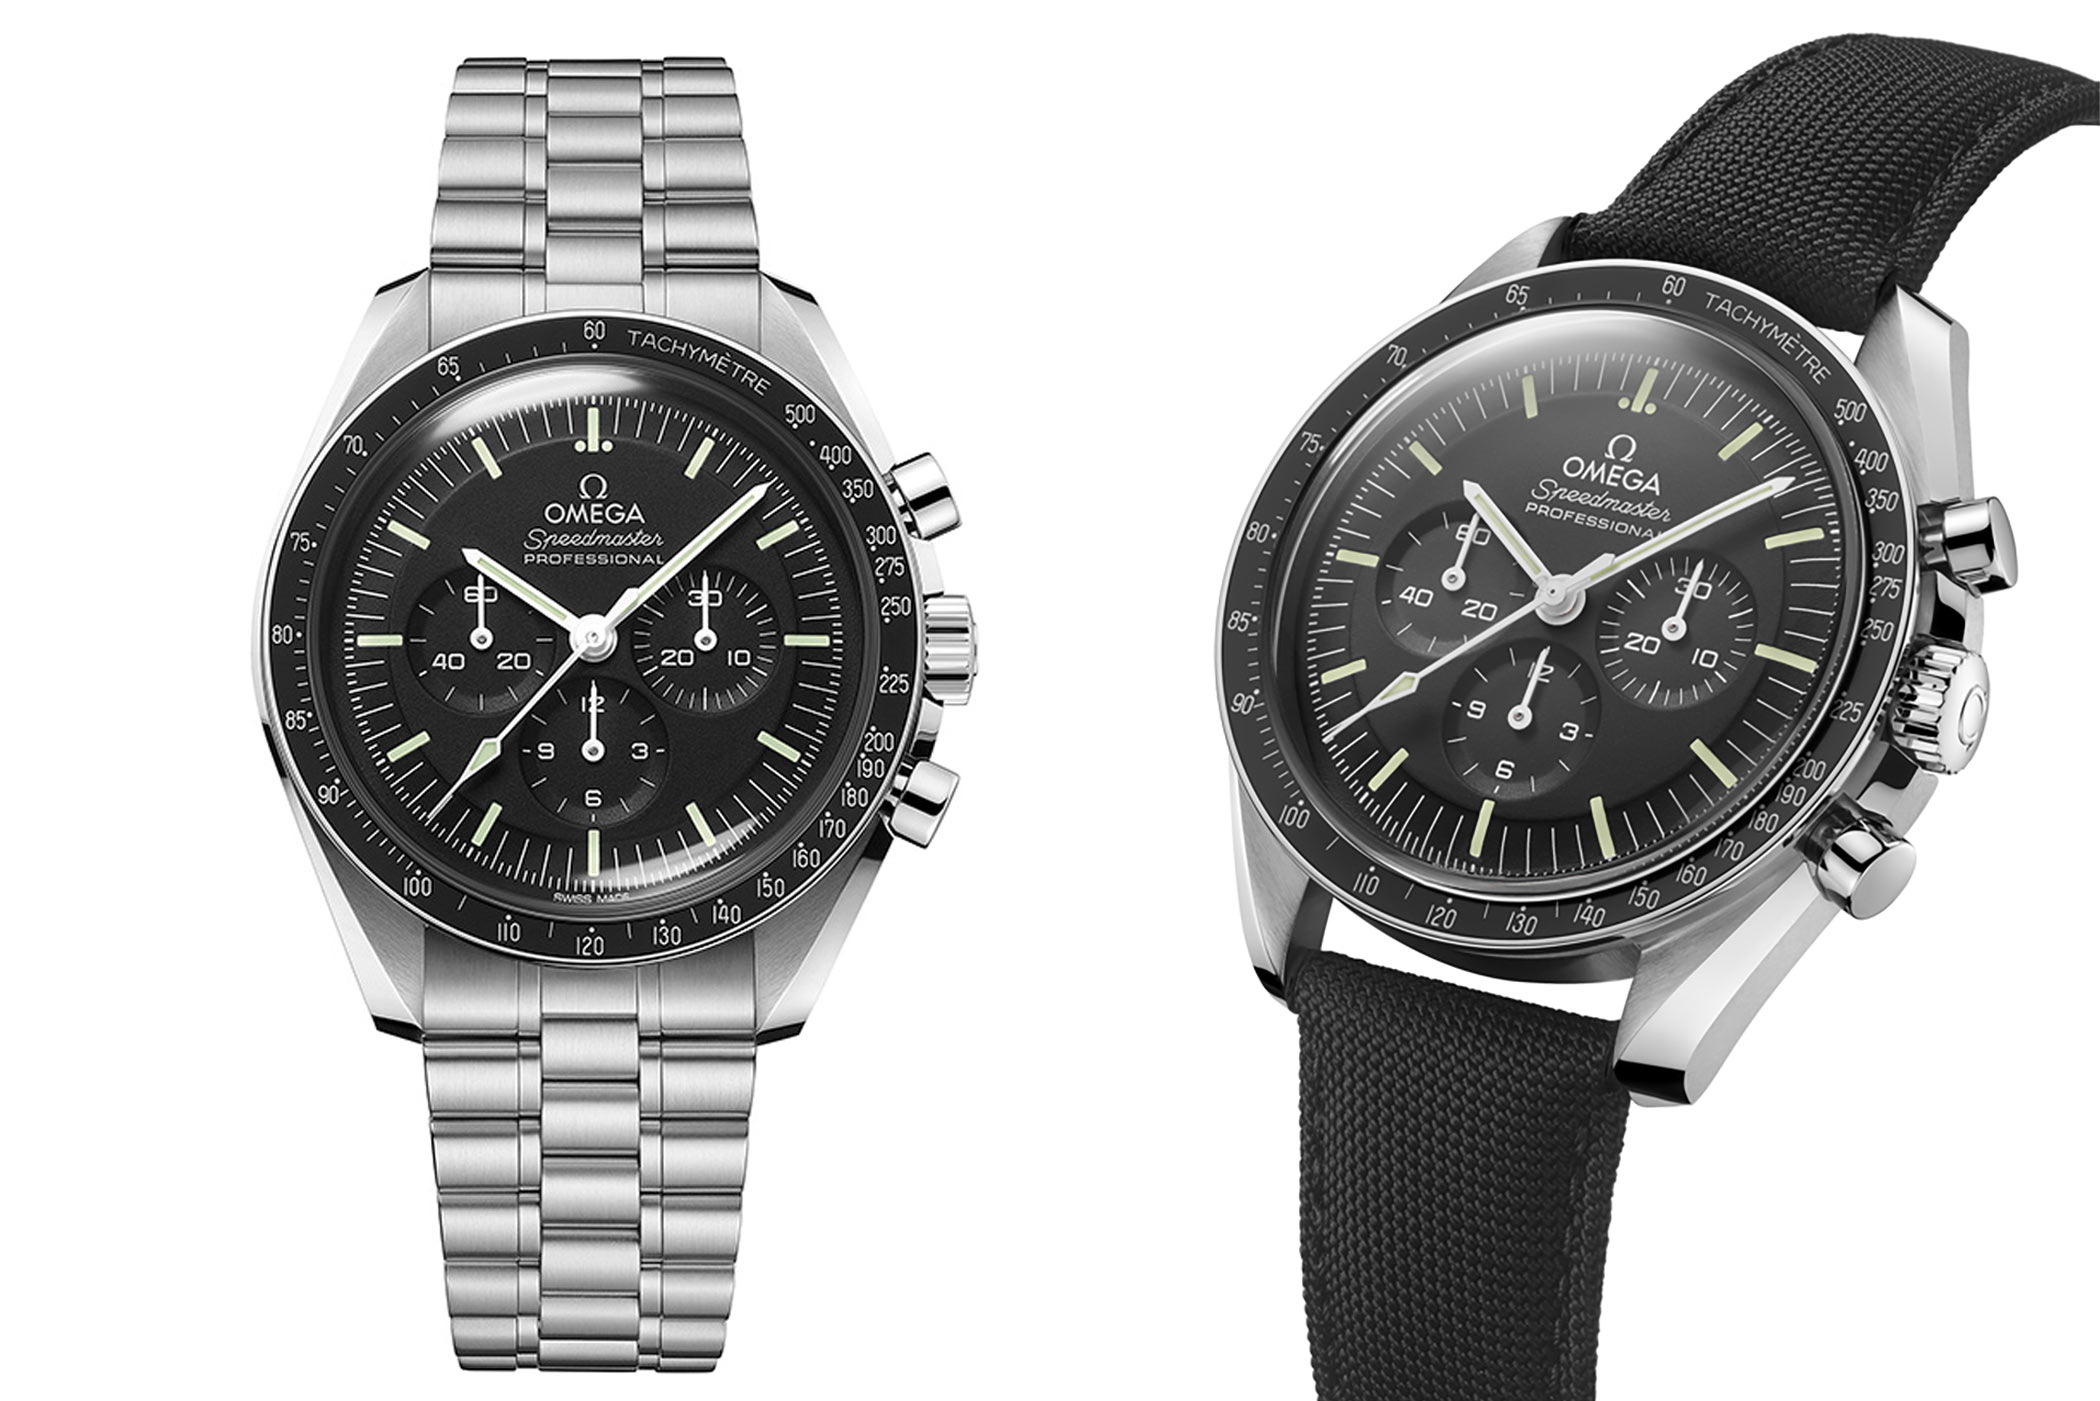 Omega Moonwatch Professional Co-axial Master Chronometer Chronograph